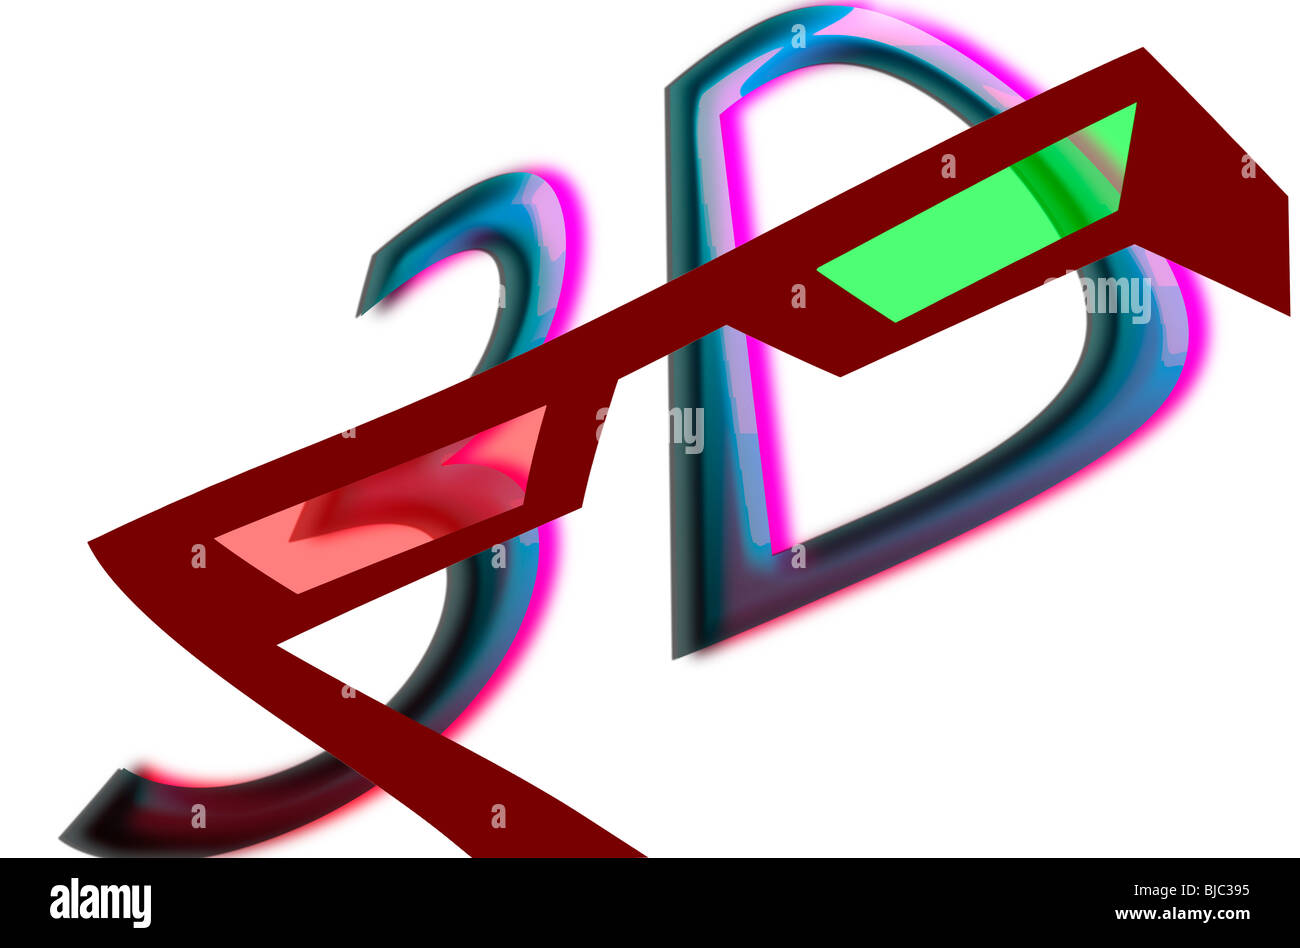 Illustration of 3d concept- view through 3d glasses Stock Photo